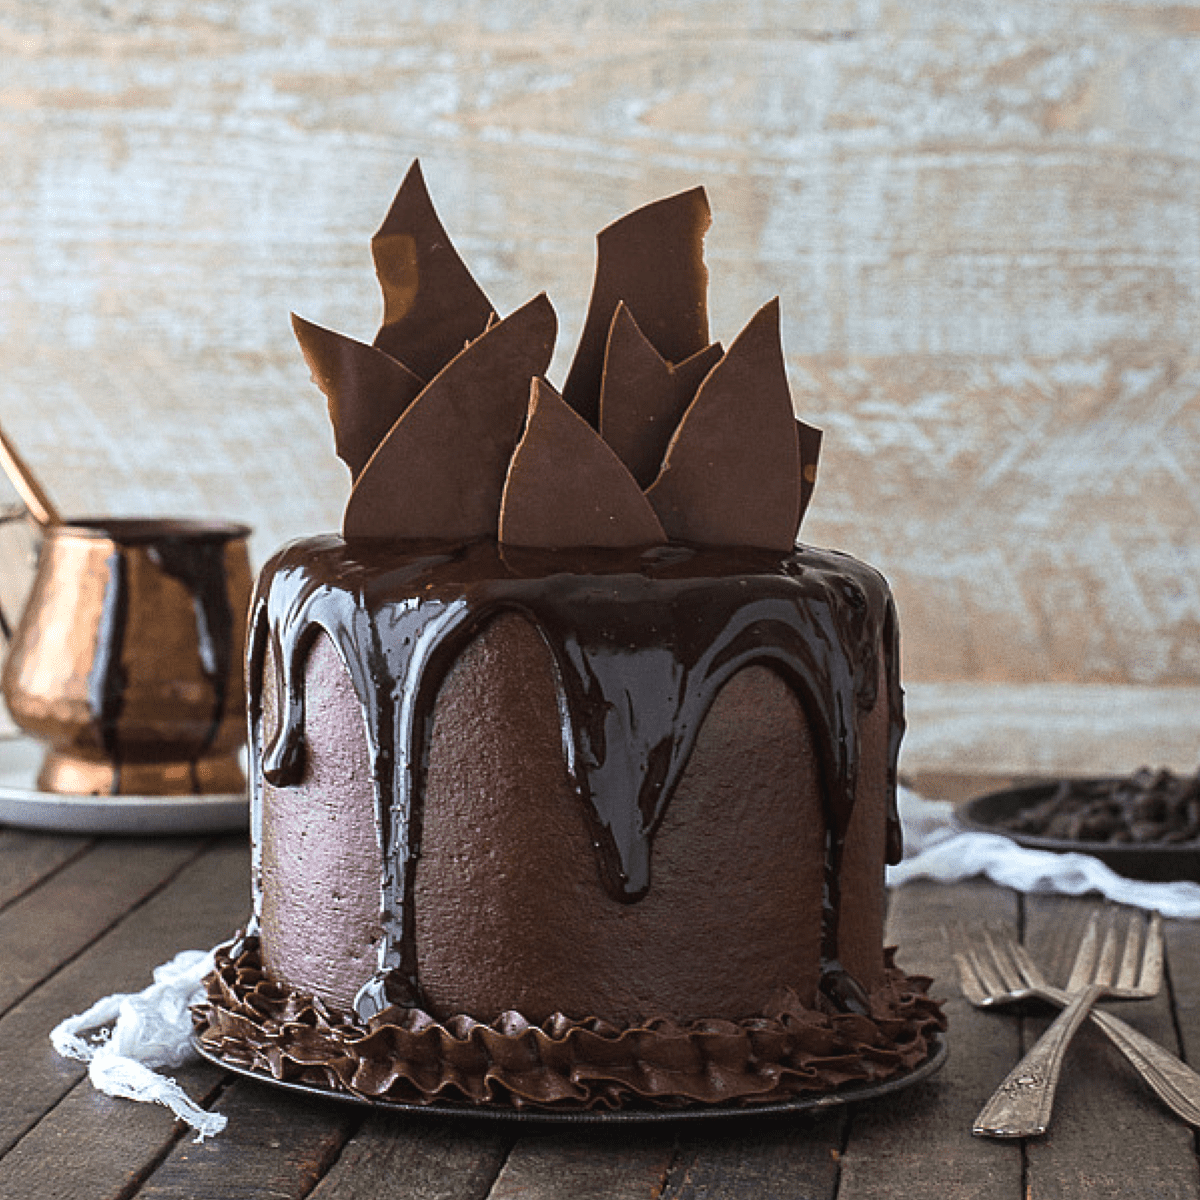 “Stunning Collection of Full 4K Chocolate Cake Images: Over 999 to Choose From!”